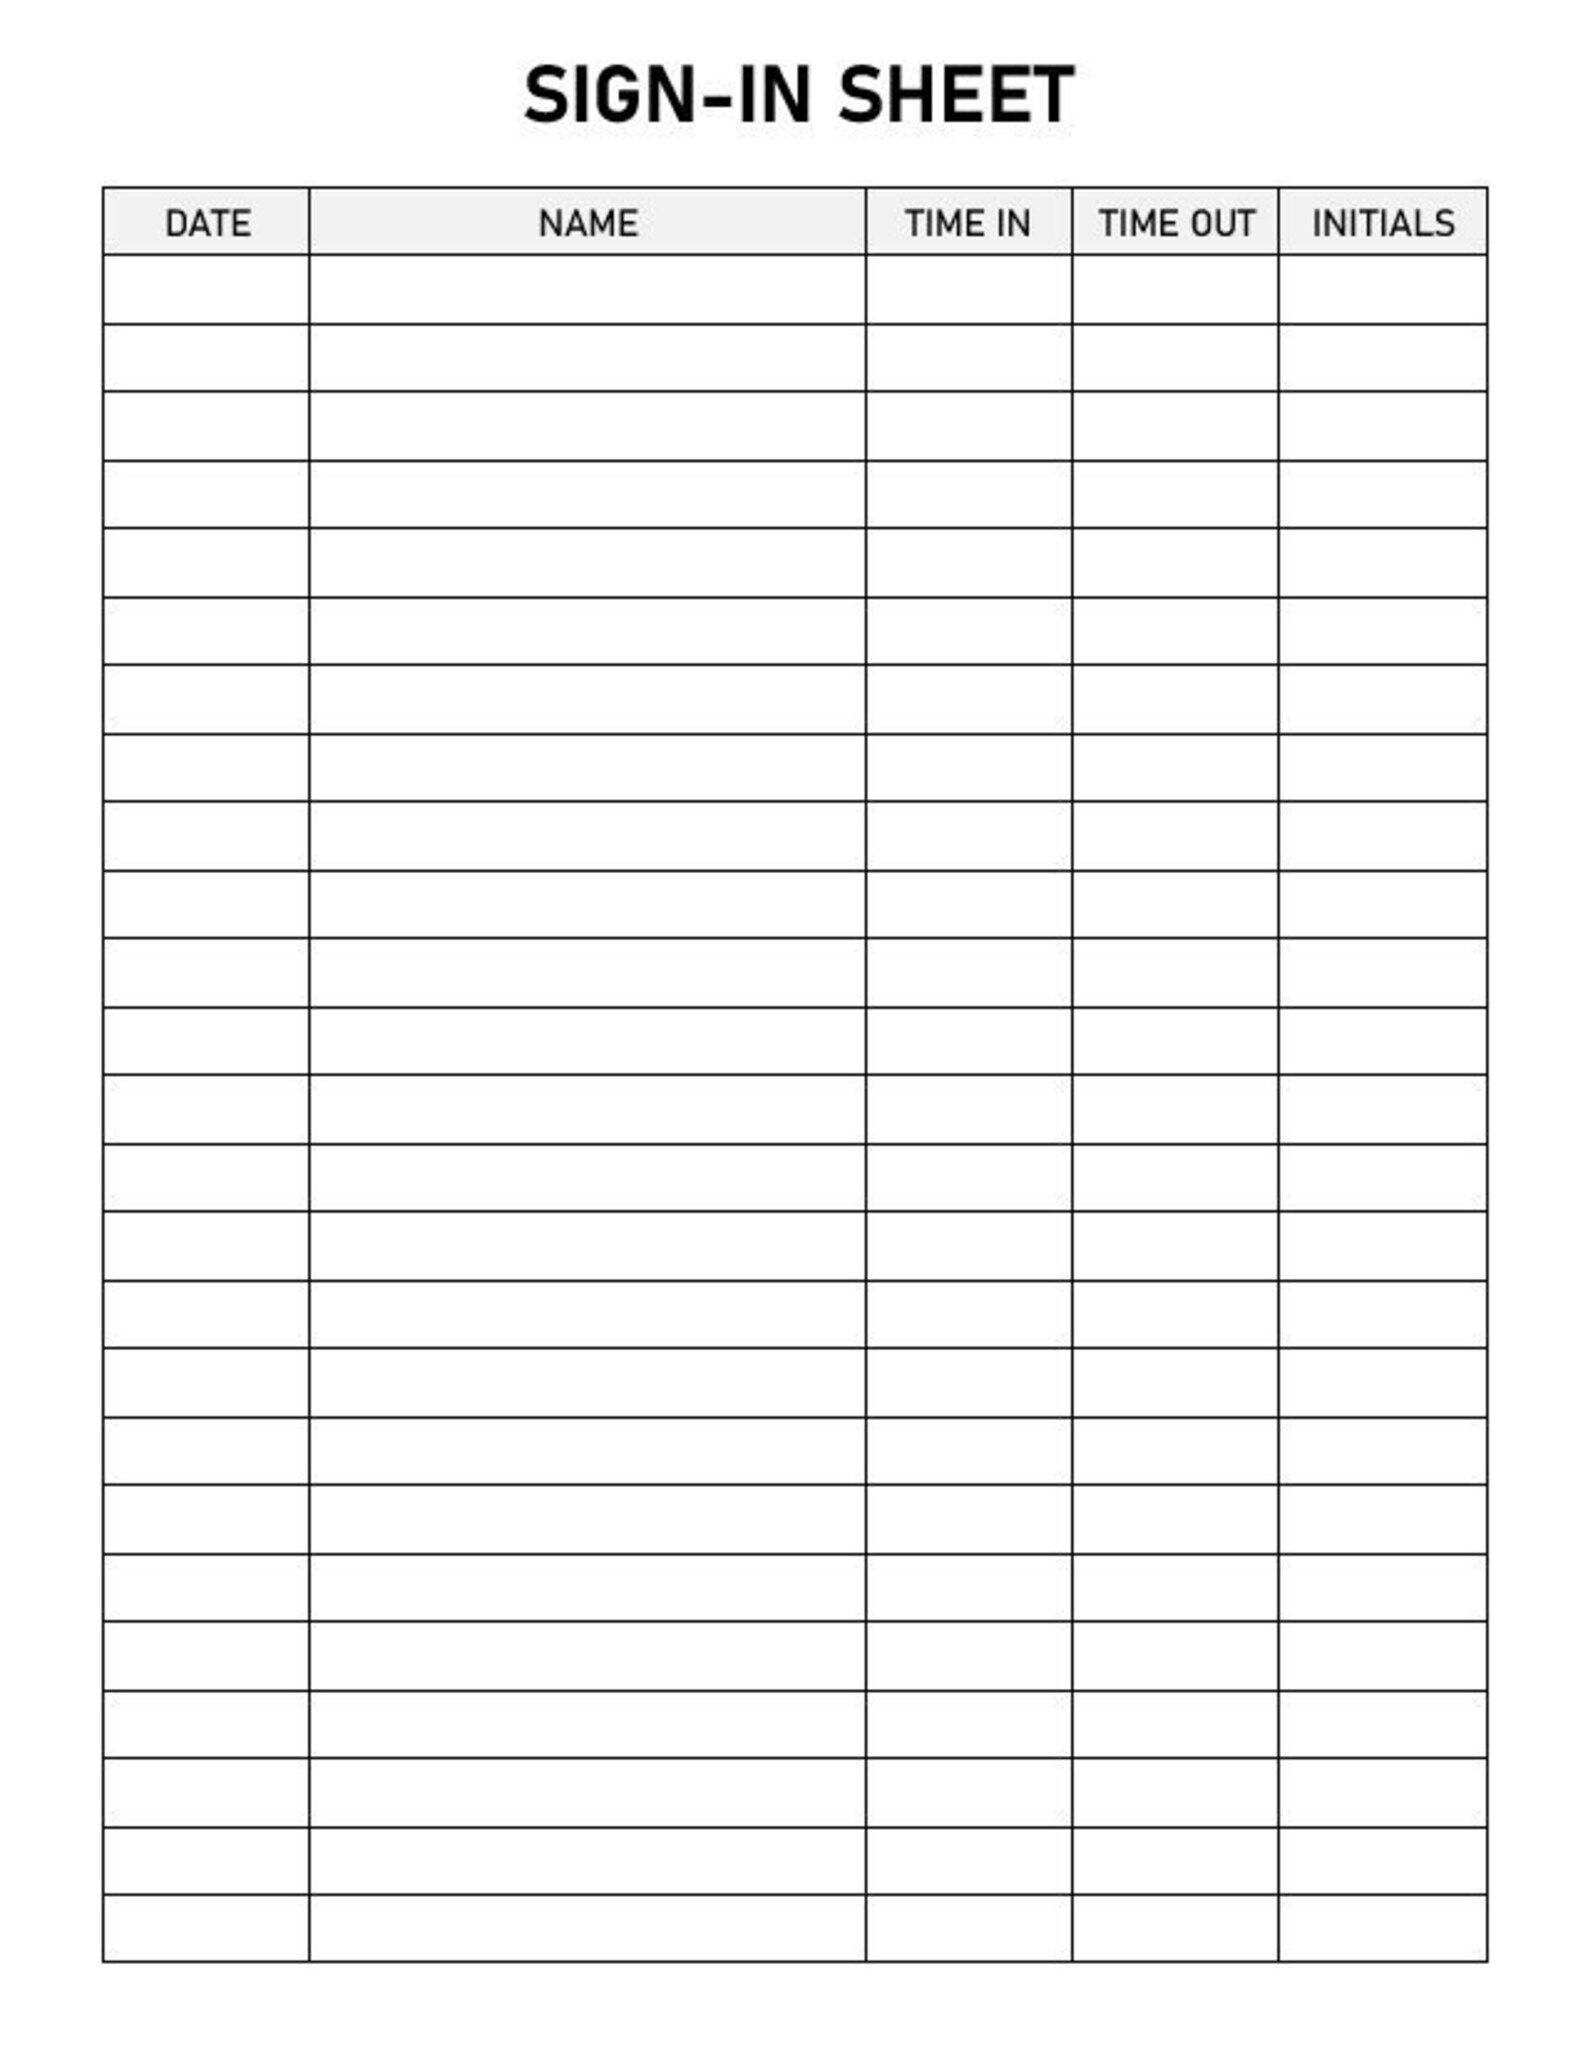 printable-sign-in-sheet-etsy